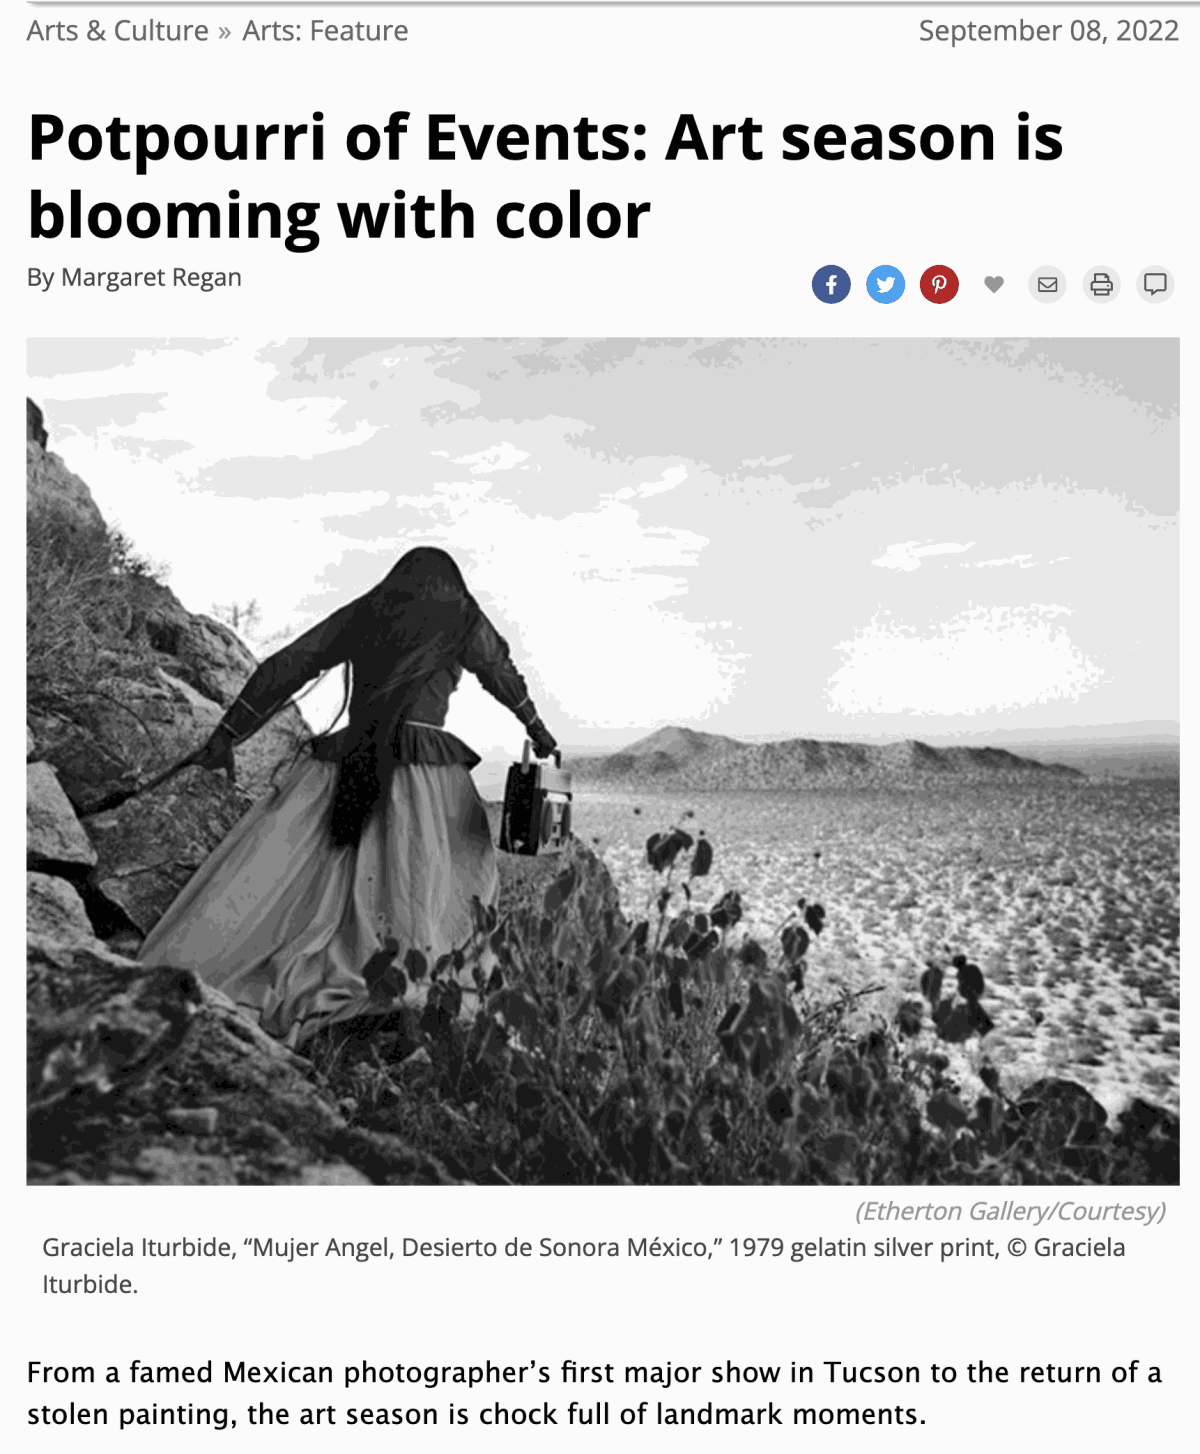 Potpourri of Events: Art season is blooming with color